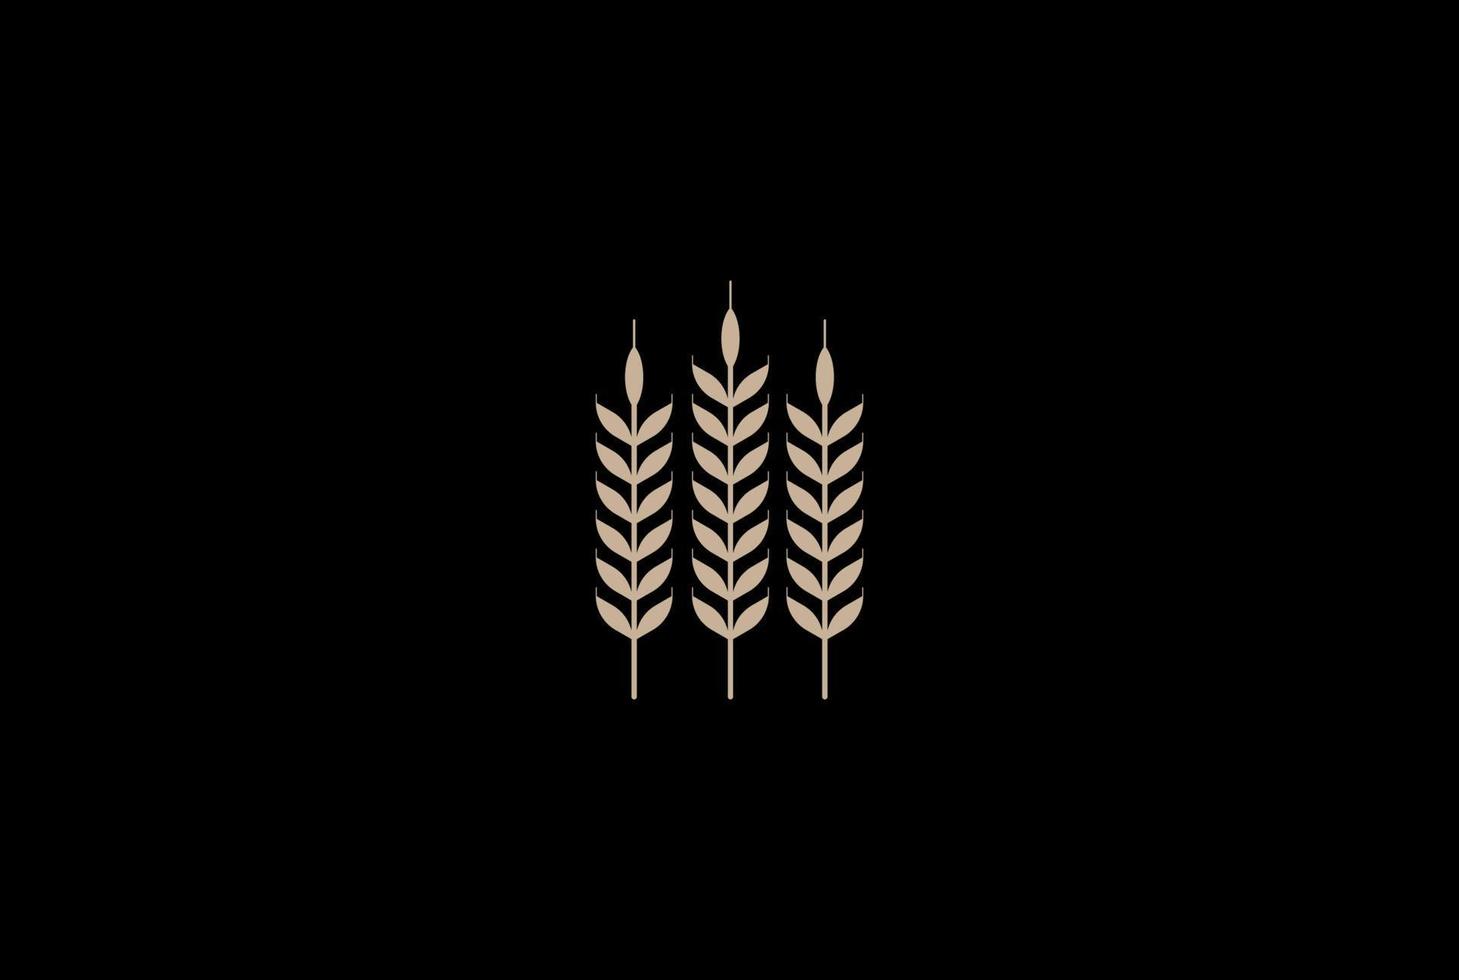 Simple Minimalist Golden Grain Wheat Rice for Brewery or Bakery Logo Design Vector